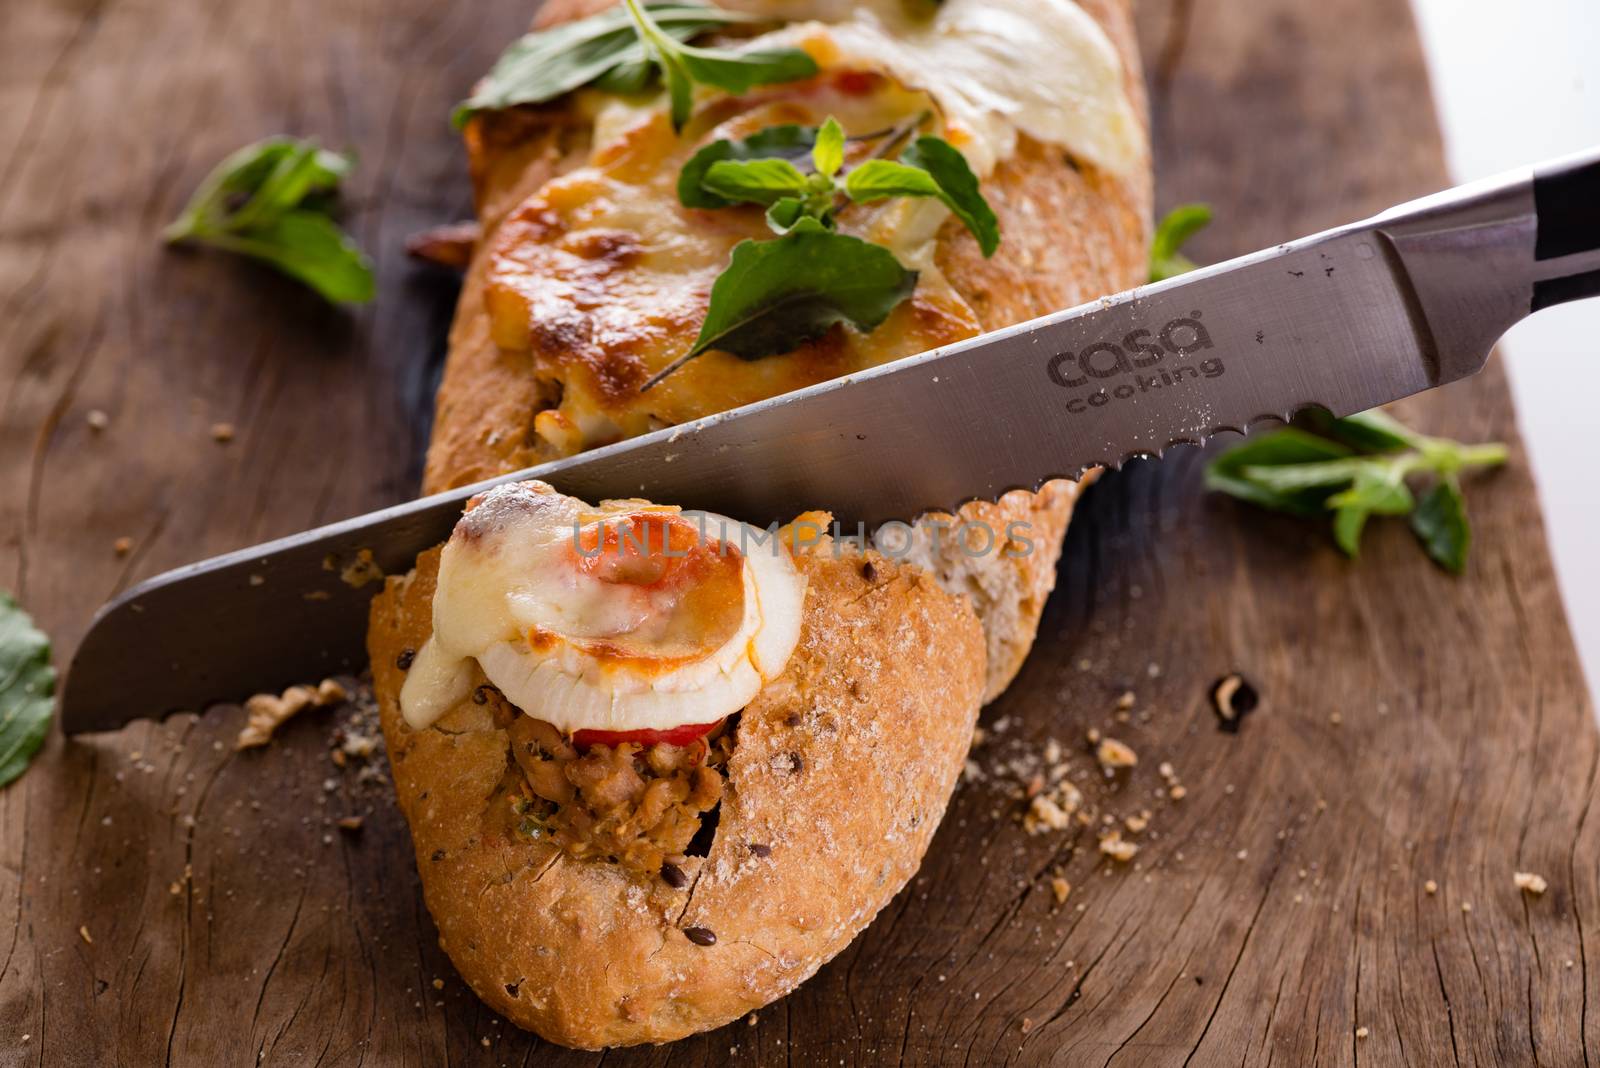 pizza baguette with mozzarella onion and tuna decorated with basil leafs